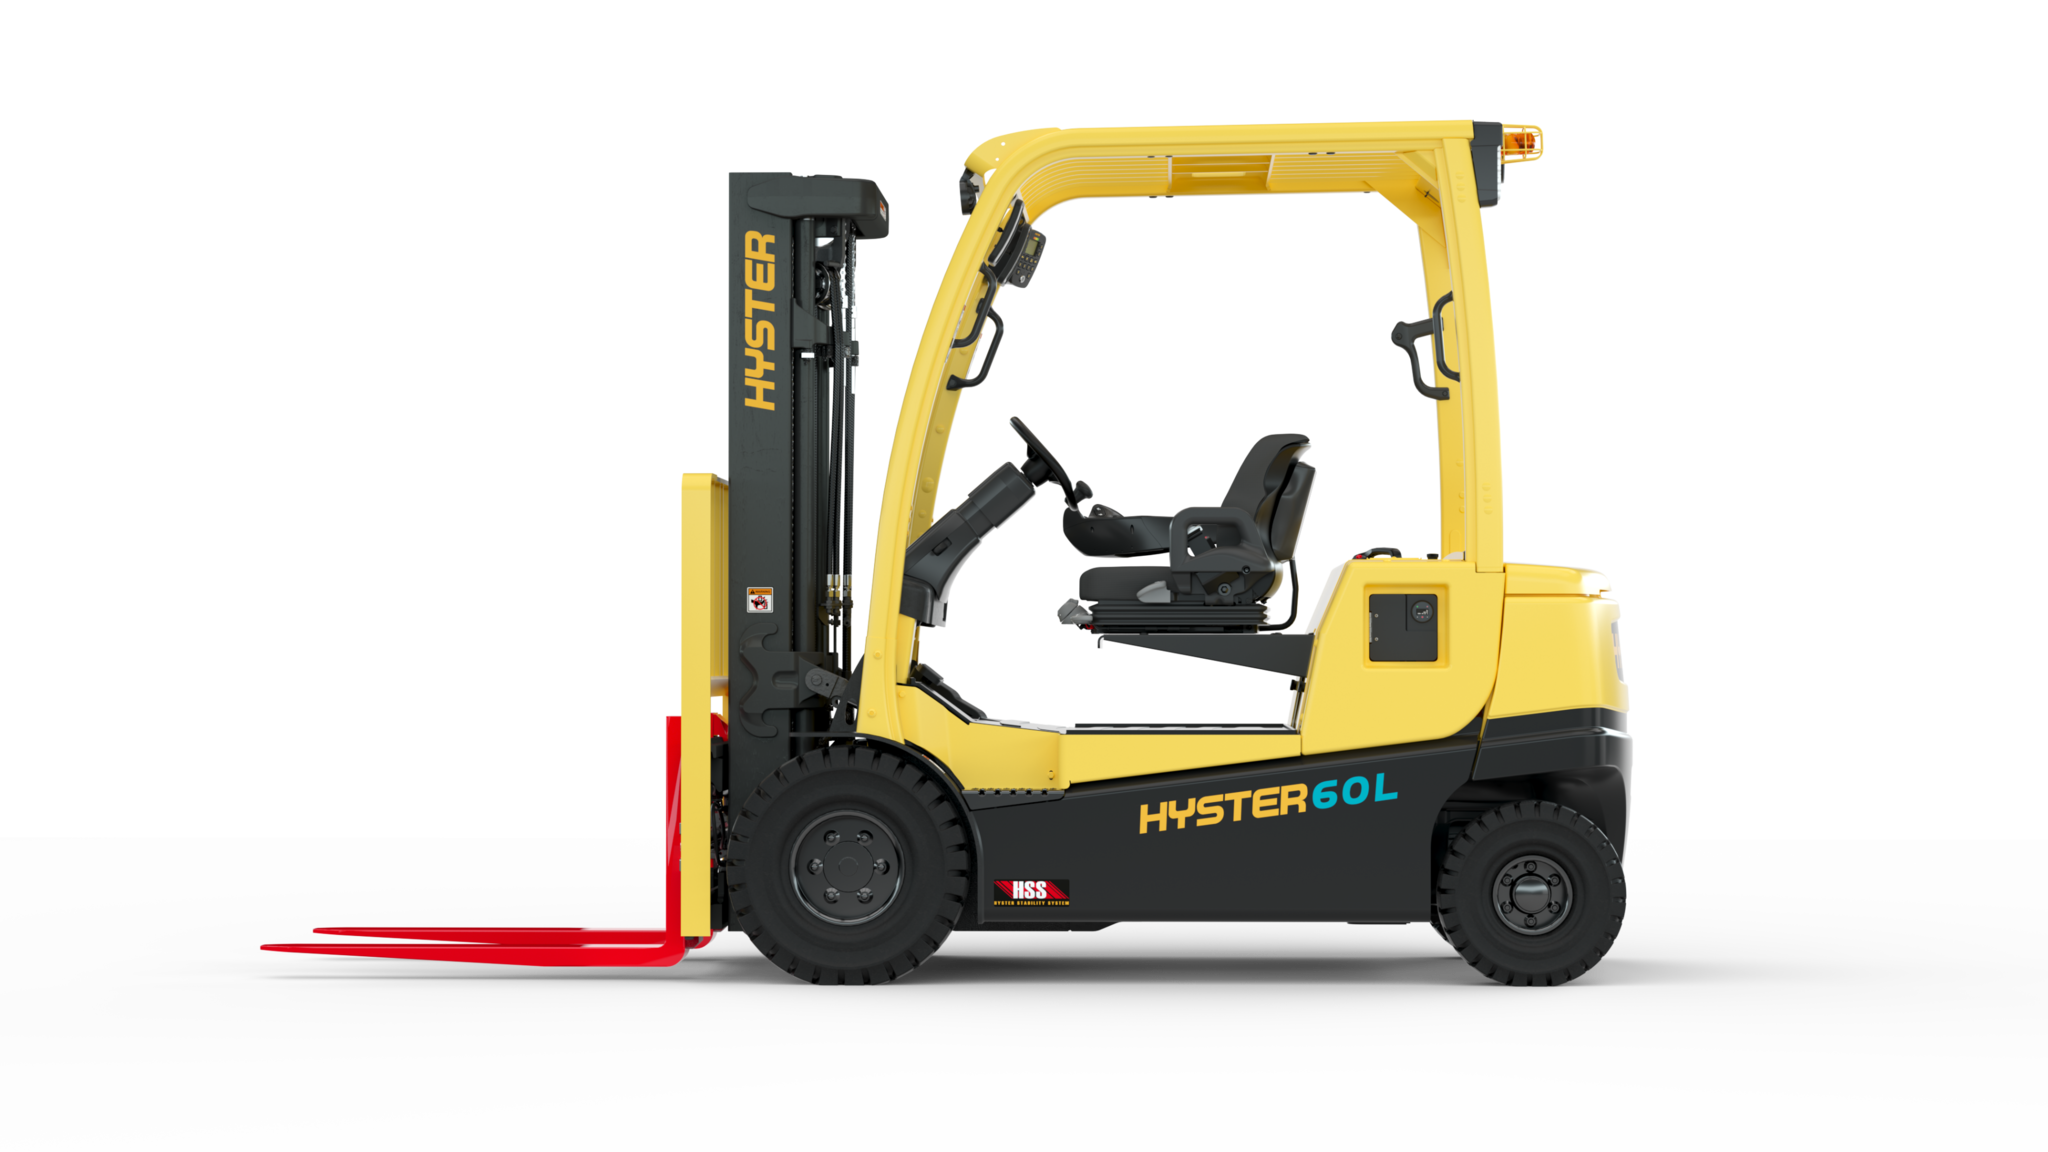 Hyster 60L image